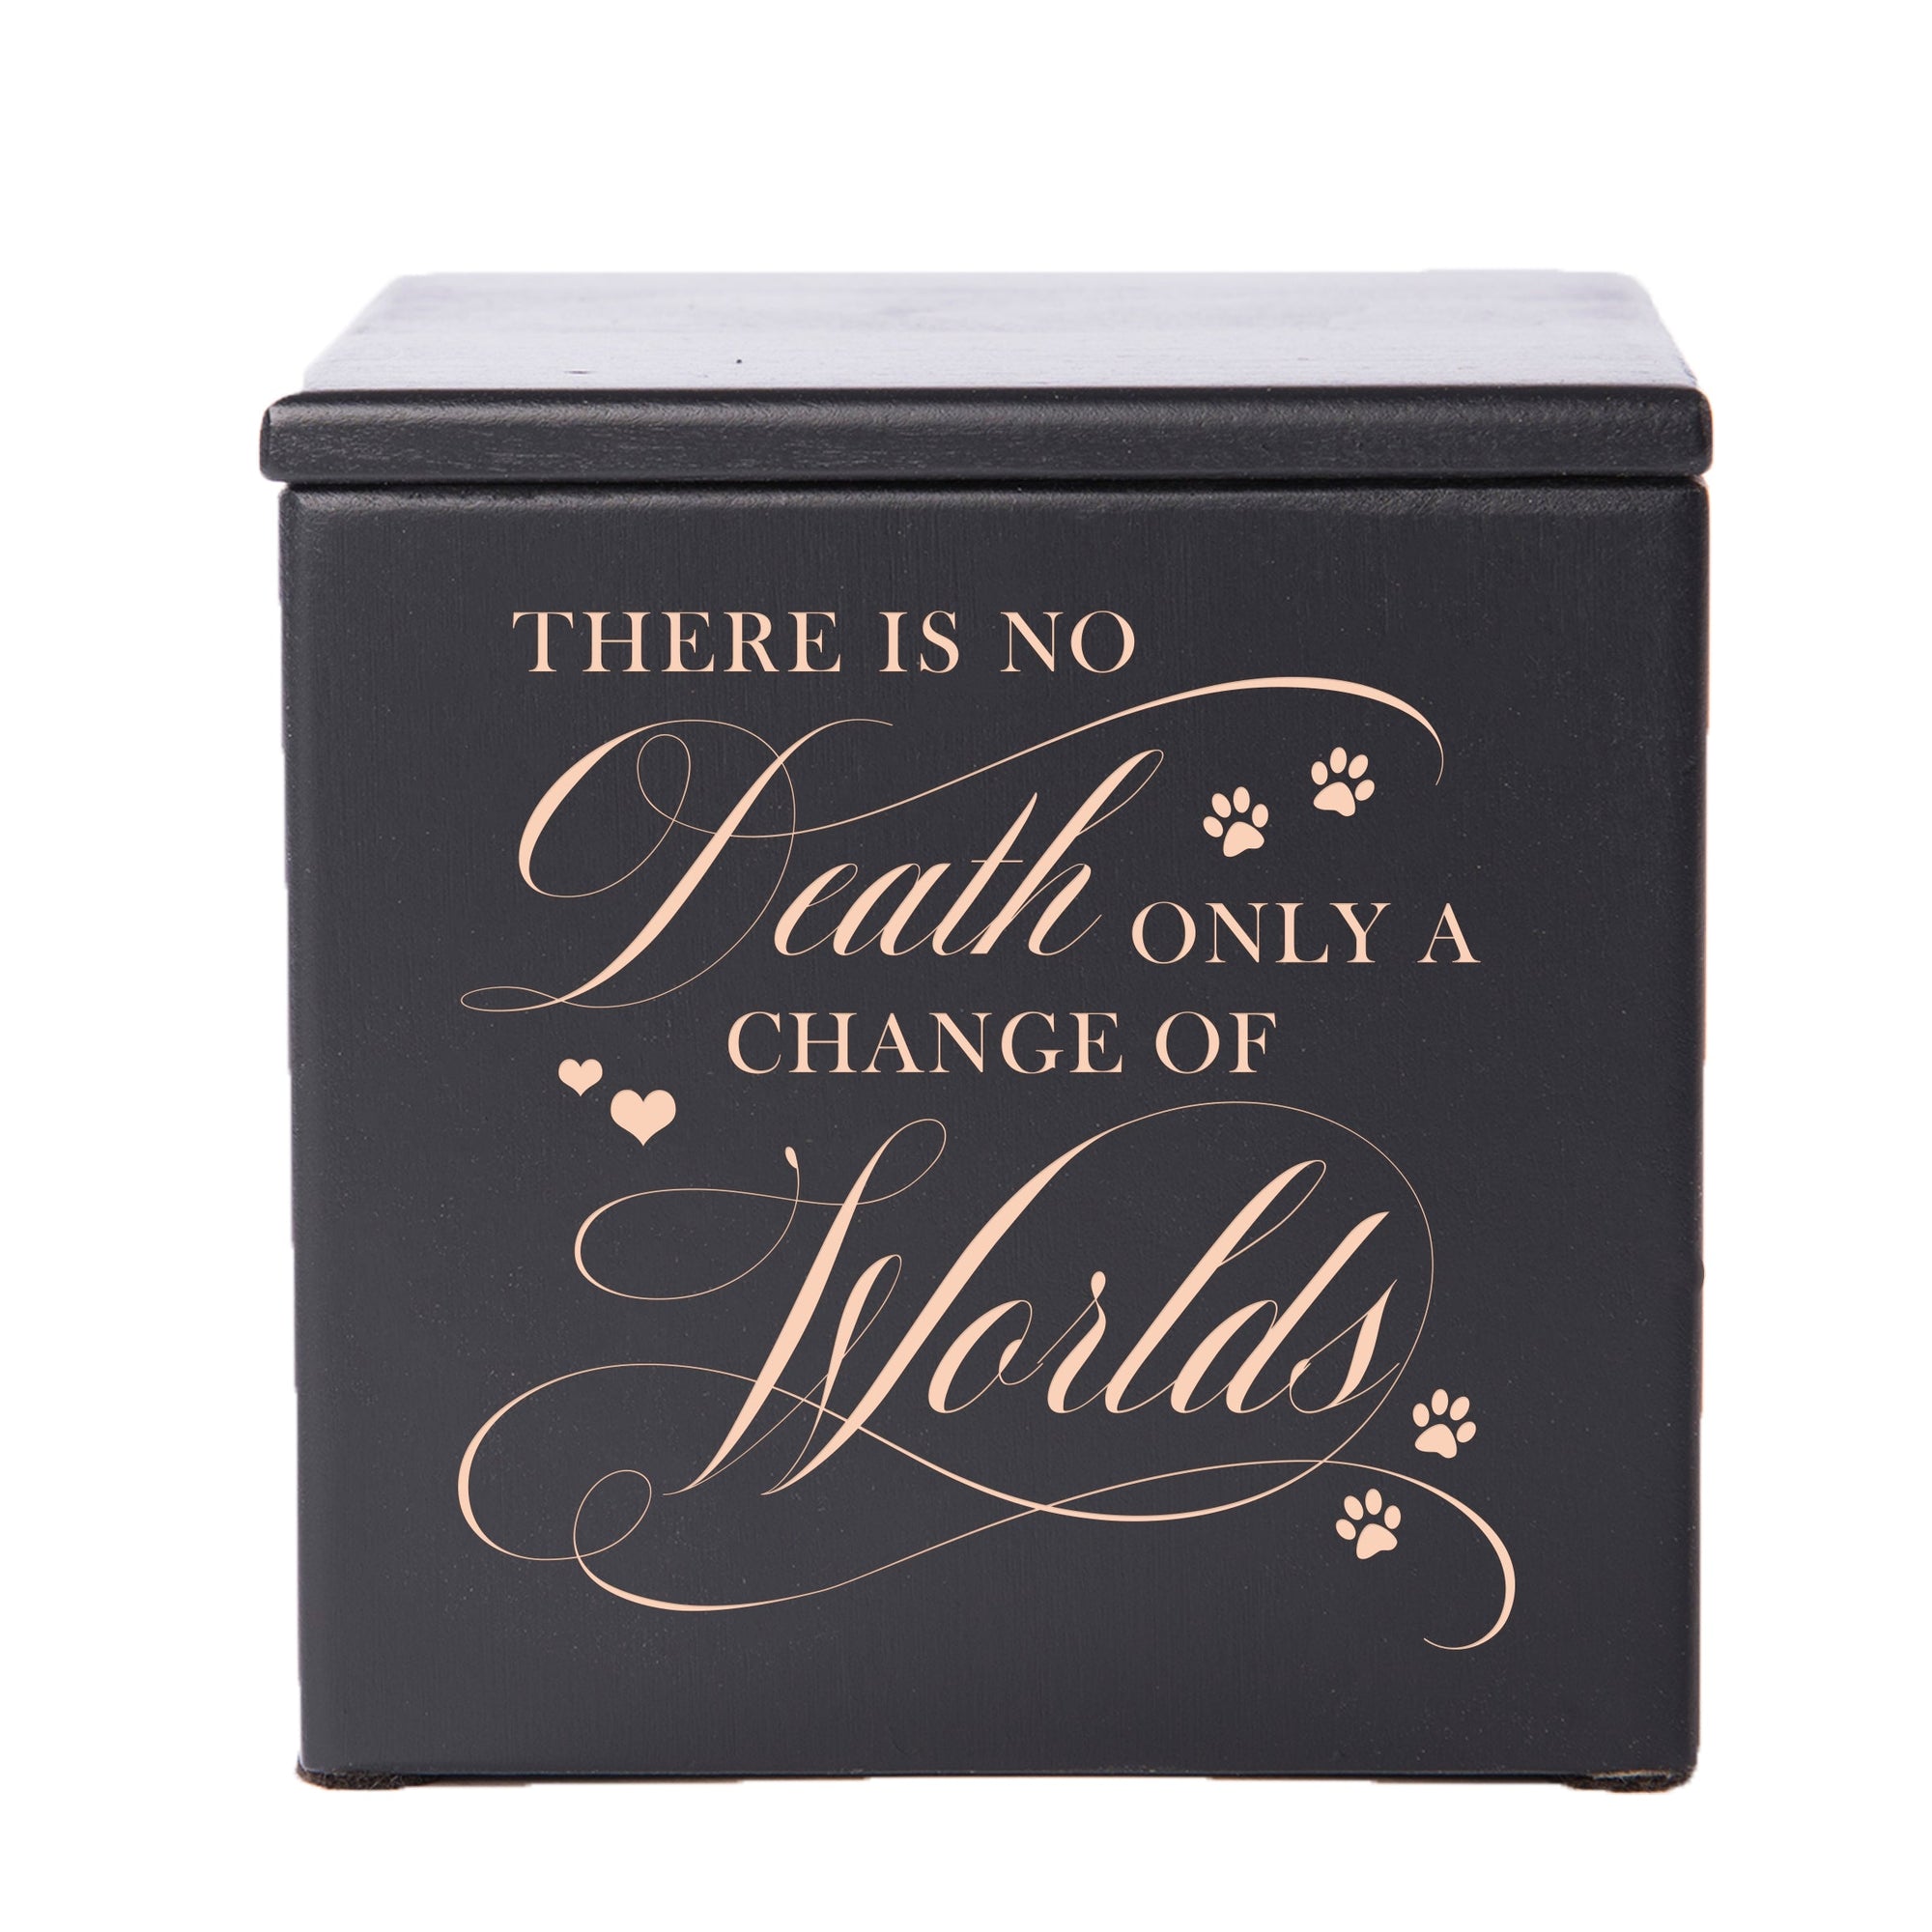 Pet Memorial Keepsake Cremation Urn Box for Dog or Cat - There Is No Death